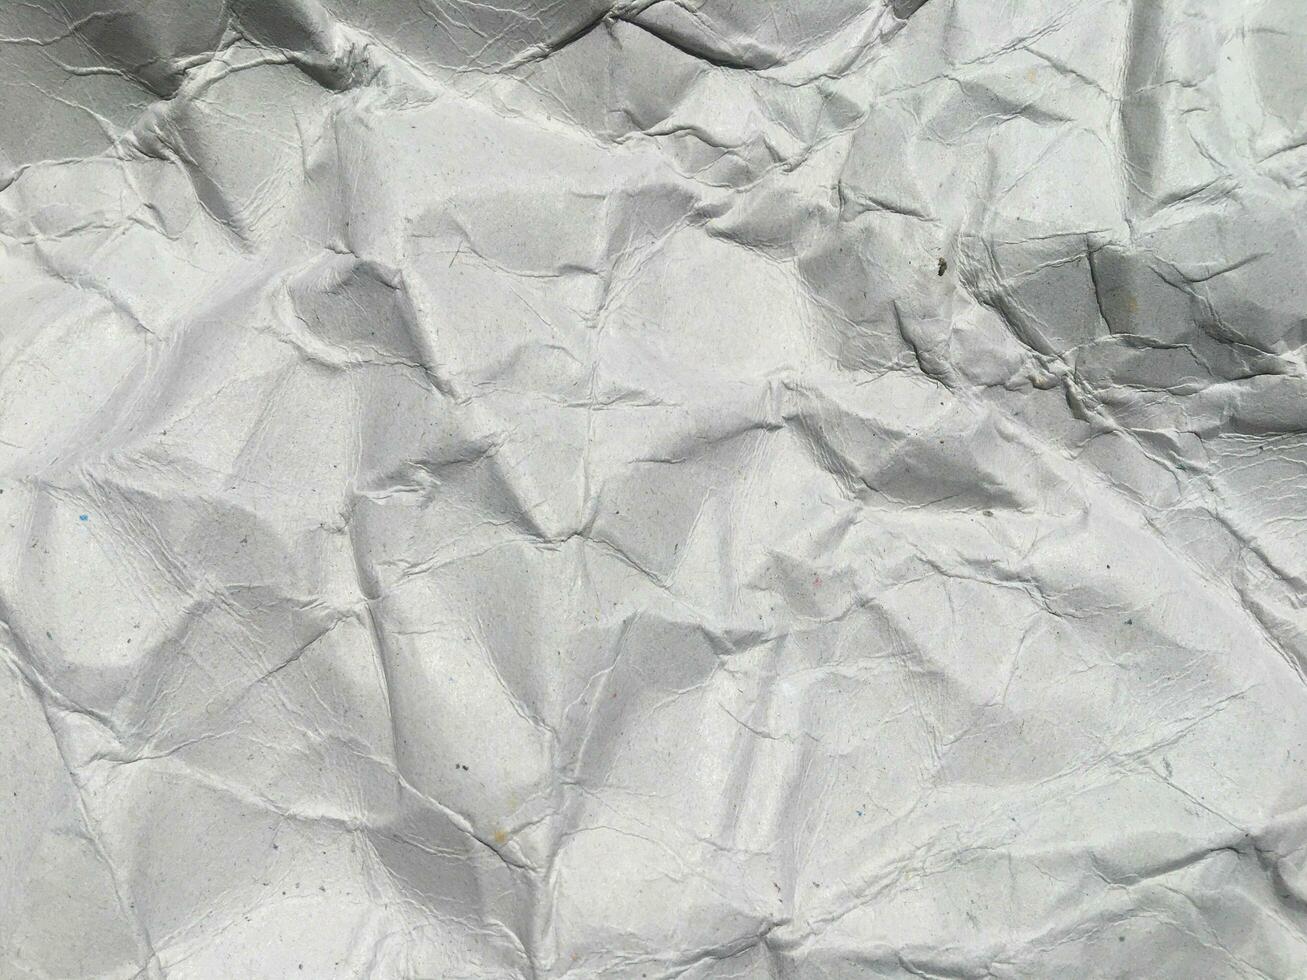 Top view of white crumpled paper texture background. Copy space for design and artwork photo